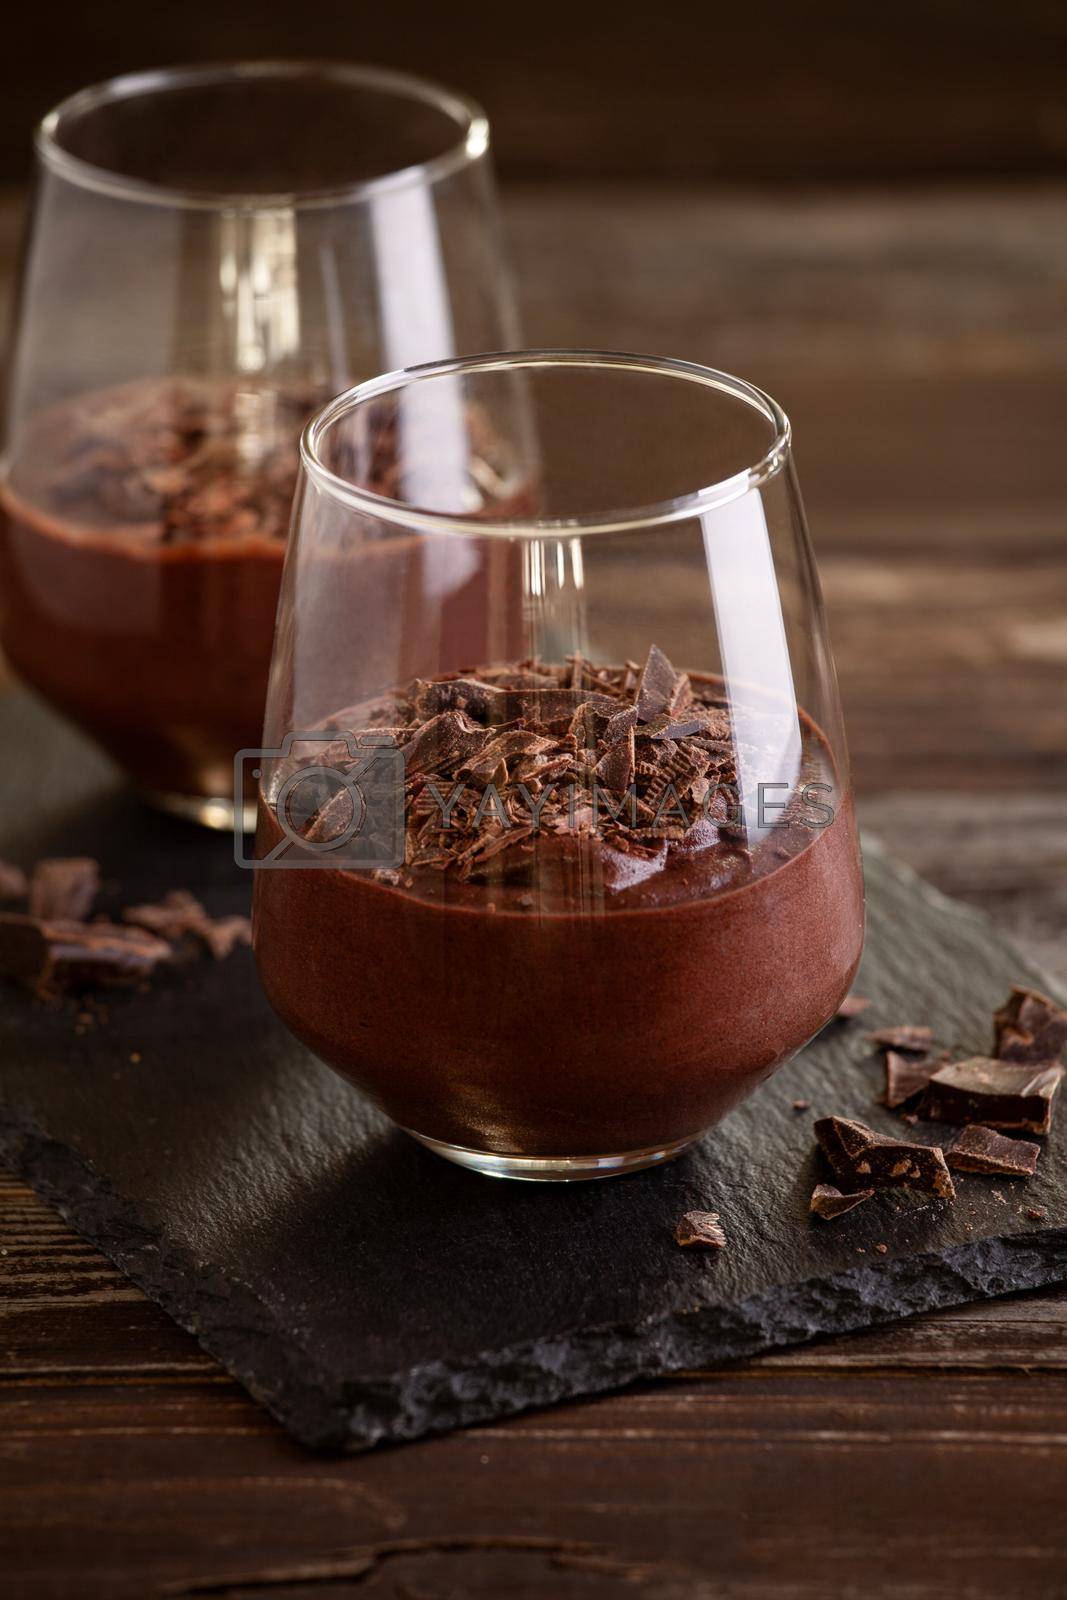 Royalty free image of Glasses of homemade sweet dark chocolate mousse by mpessaris